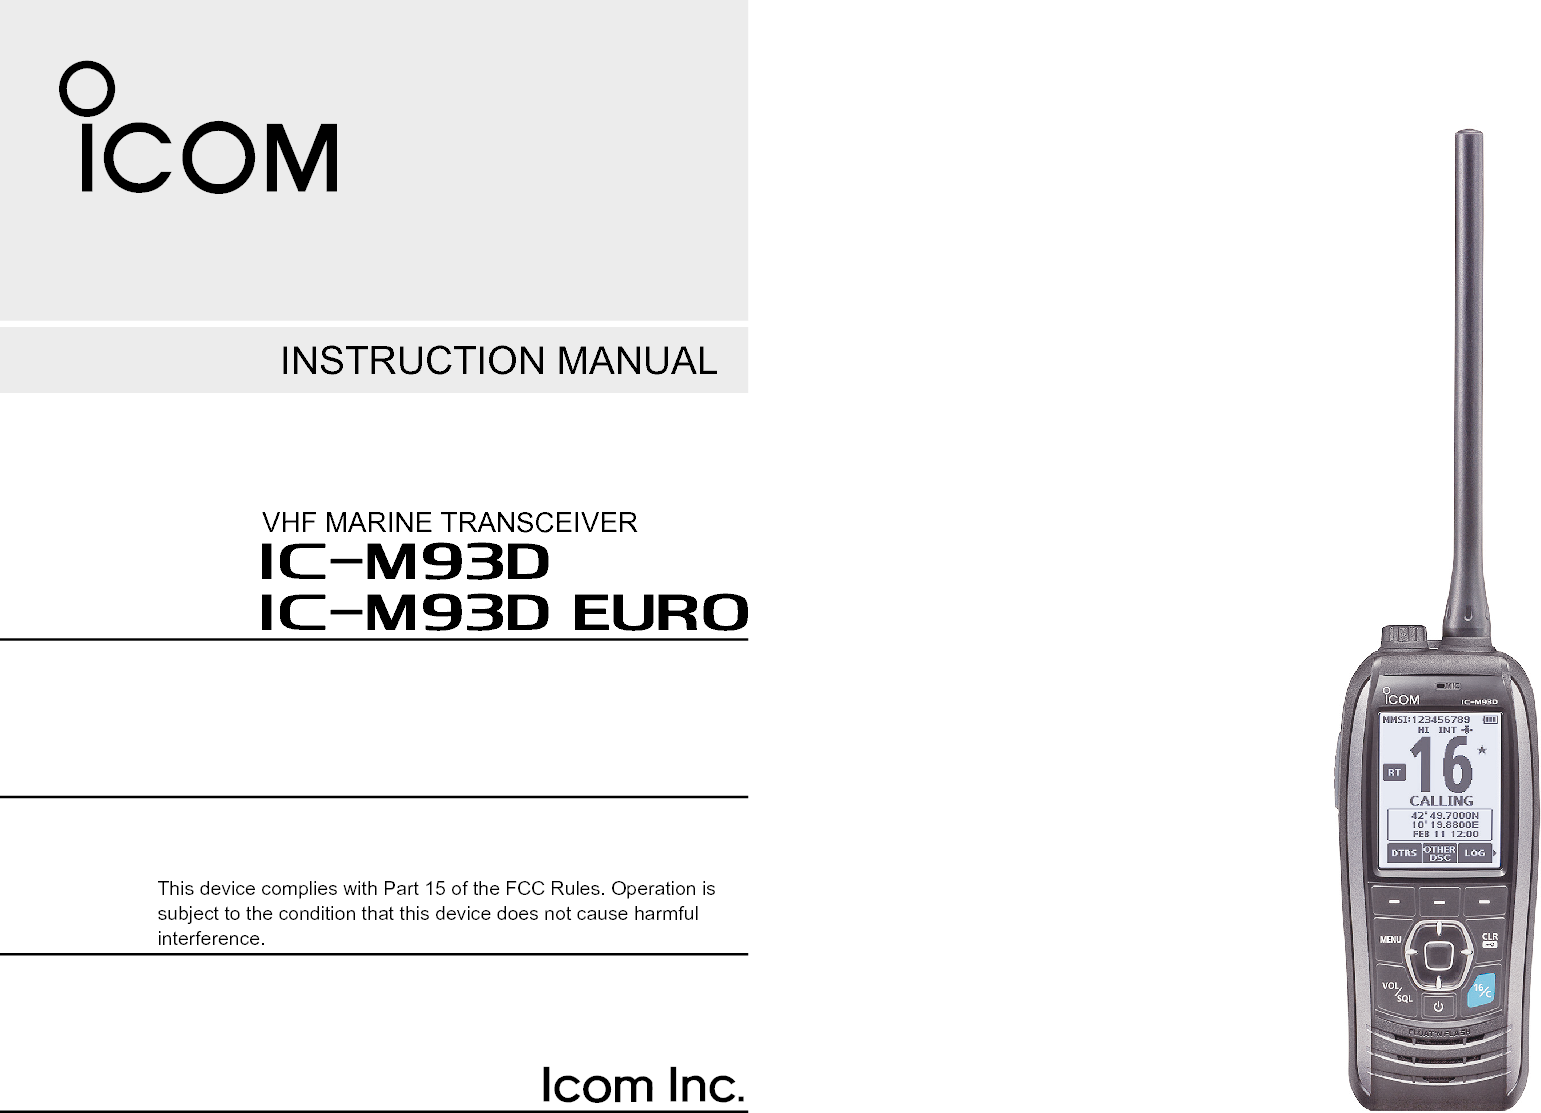 INSTRUCTION MANUALThis device complies with Part 15 of the FCC Rules. Operation is subject to the condition that this device does not cause harmful interference.VHF MARINE TRANSCEIVERiM93D EUROiM93D